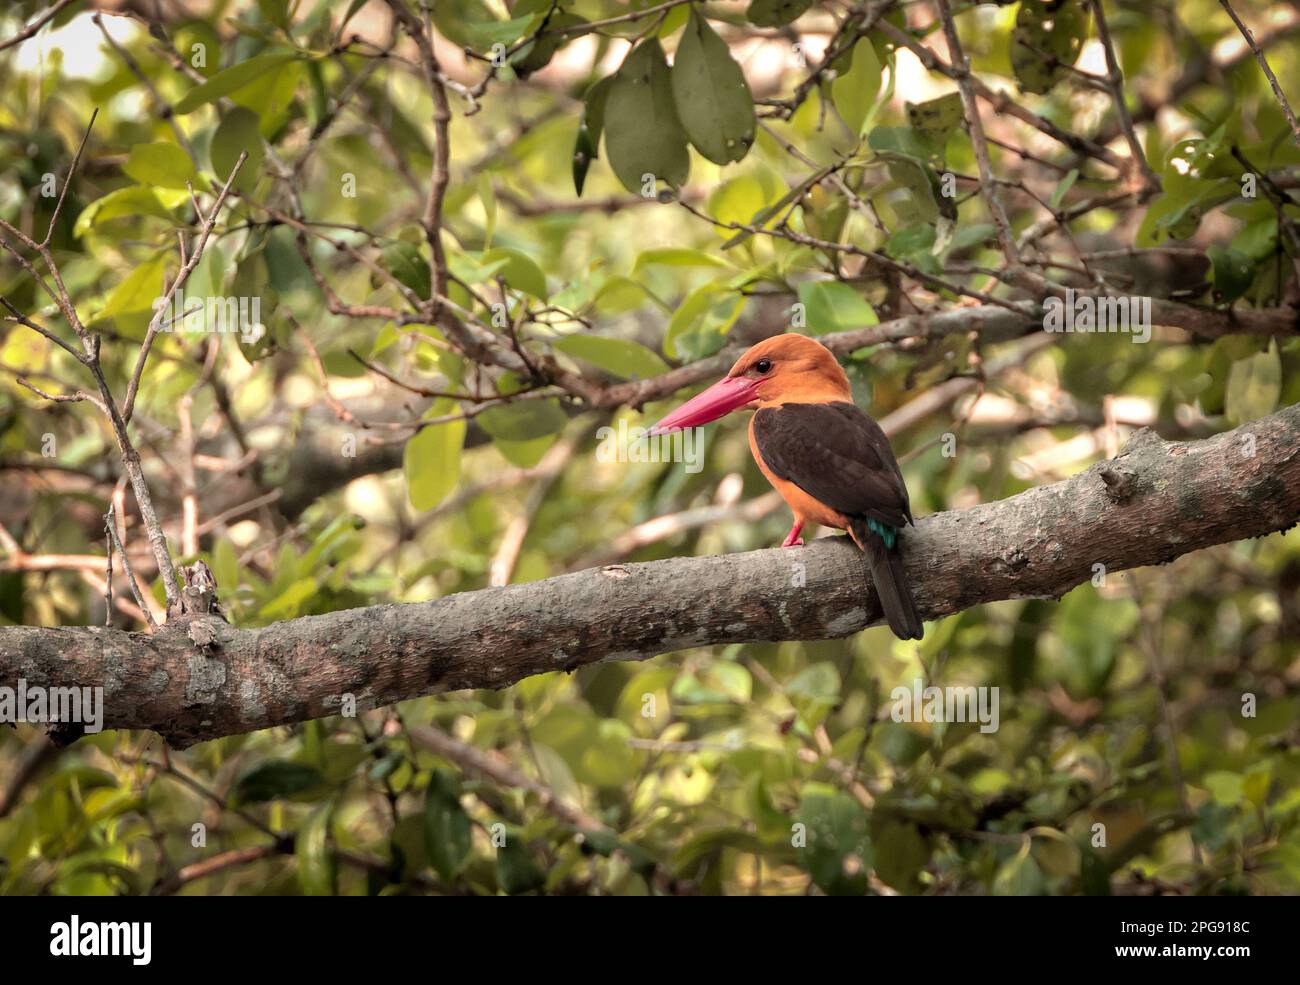 Brown-winged kingfisher is a species of bird in the subfamily Halcyoninae. It is found along the north and eastern coasts of the Bay of Bengal, occurr Stock Photo